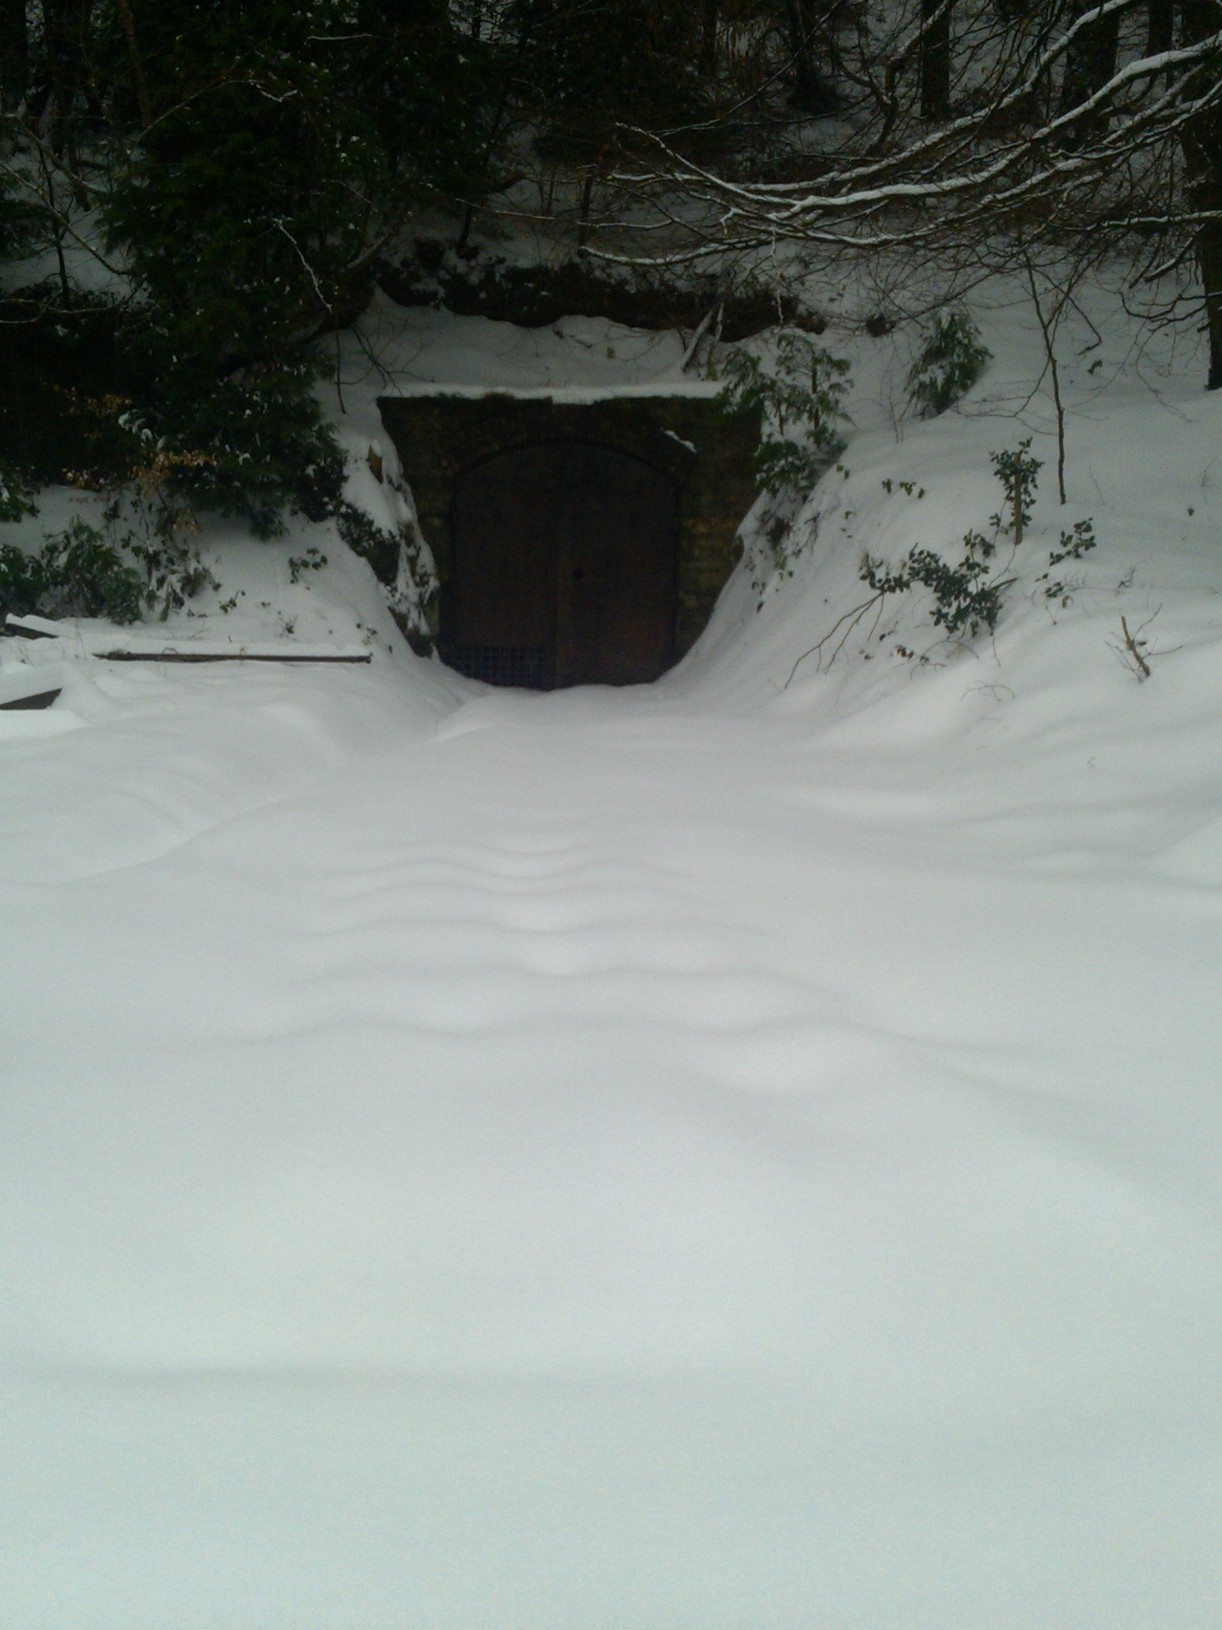 Mine entrance in the snow